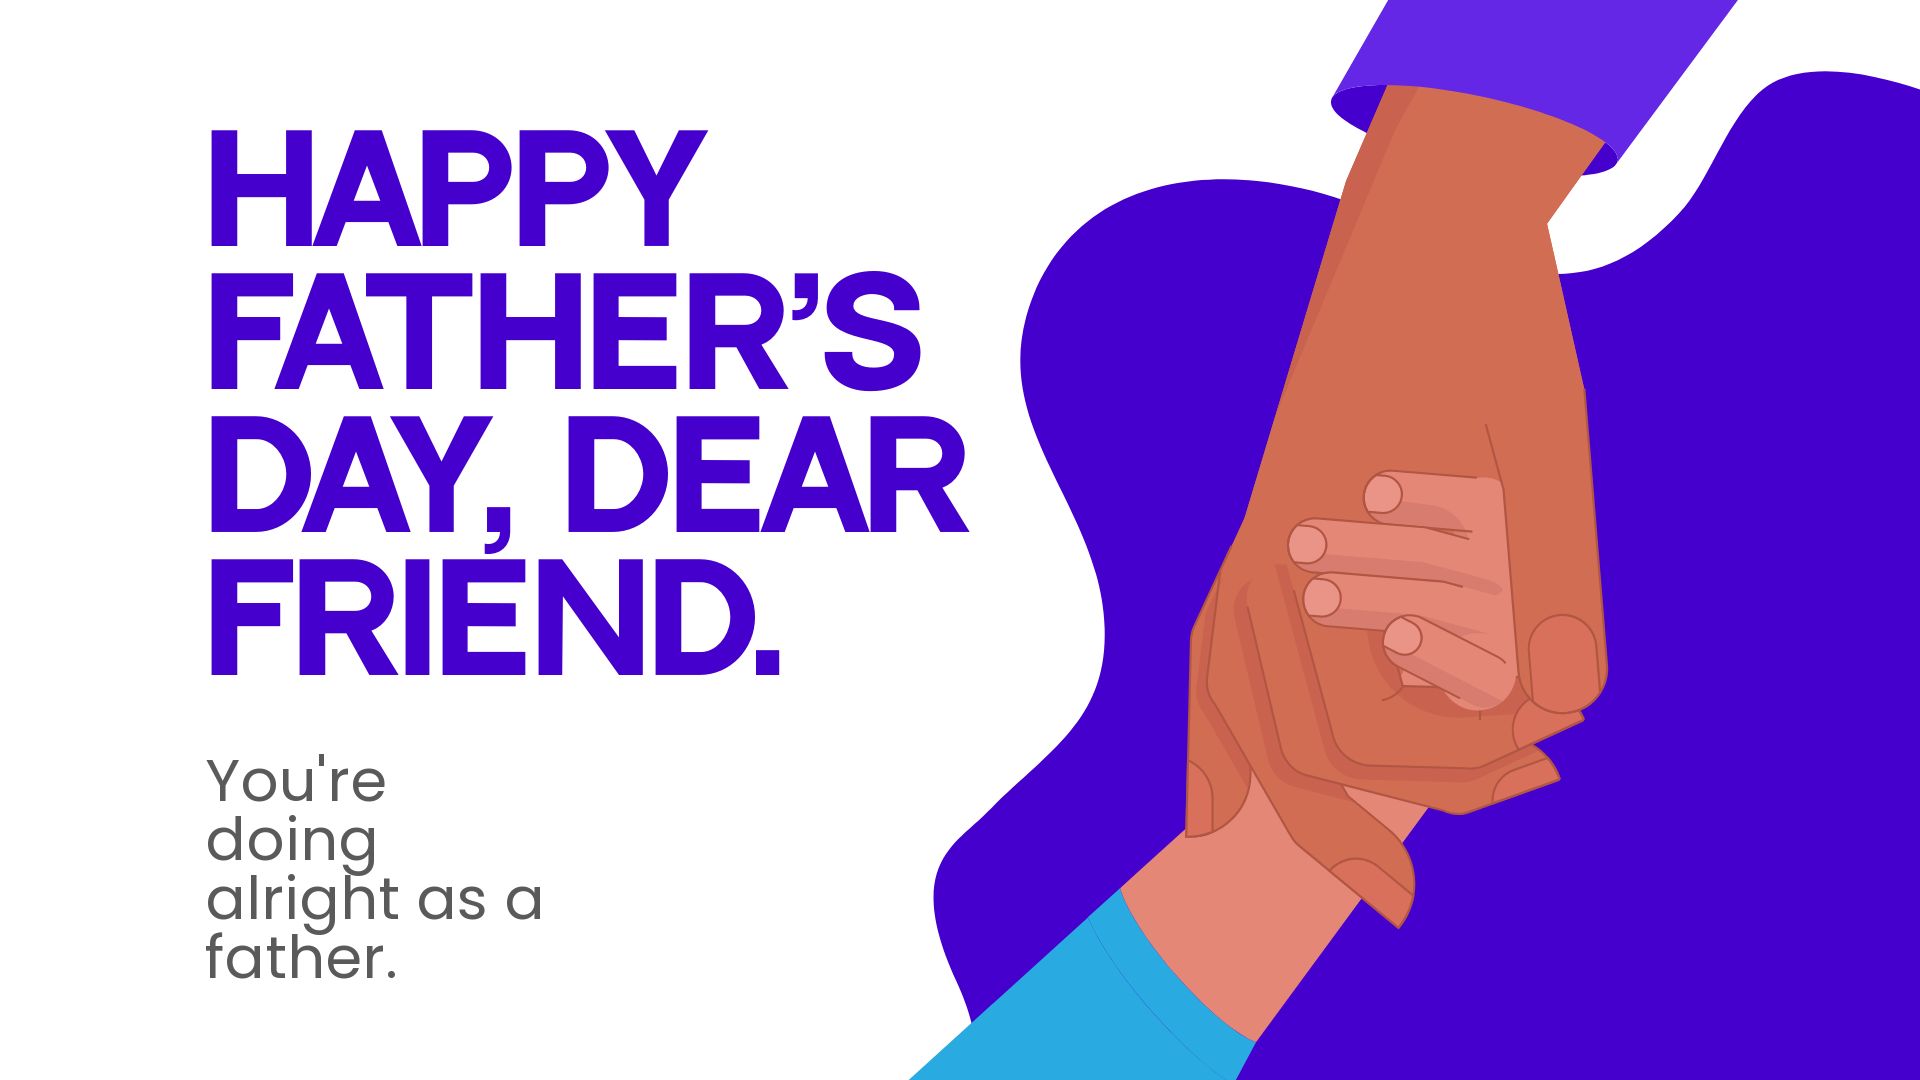 Free Happy Father's Day Friend Image in JPG